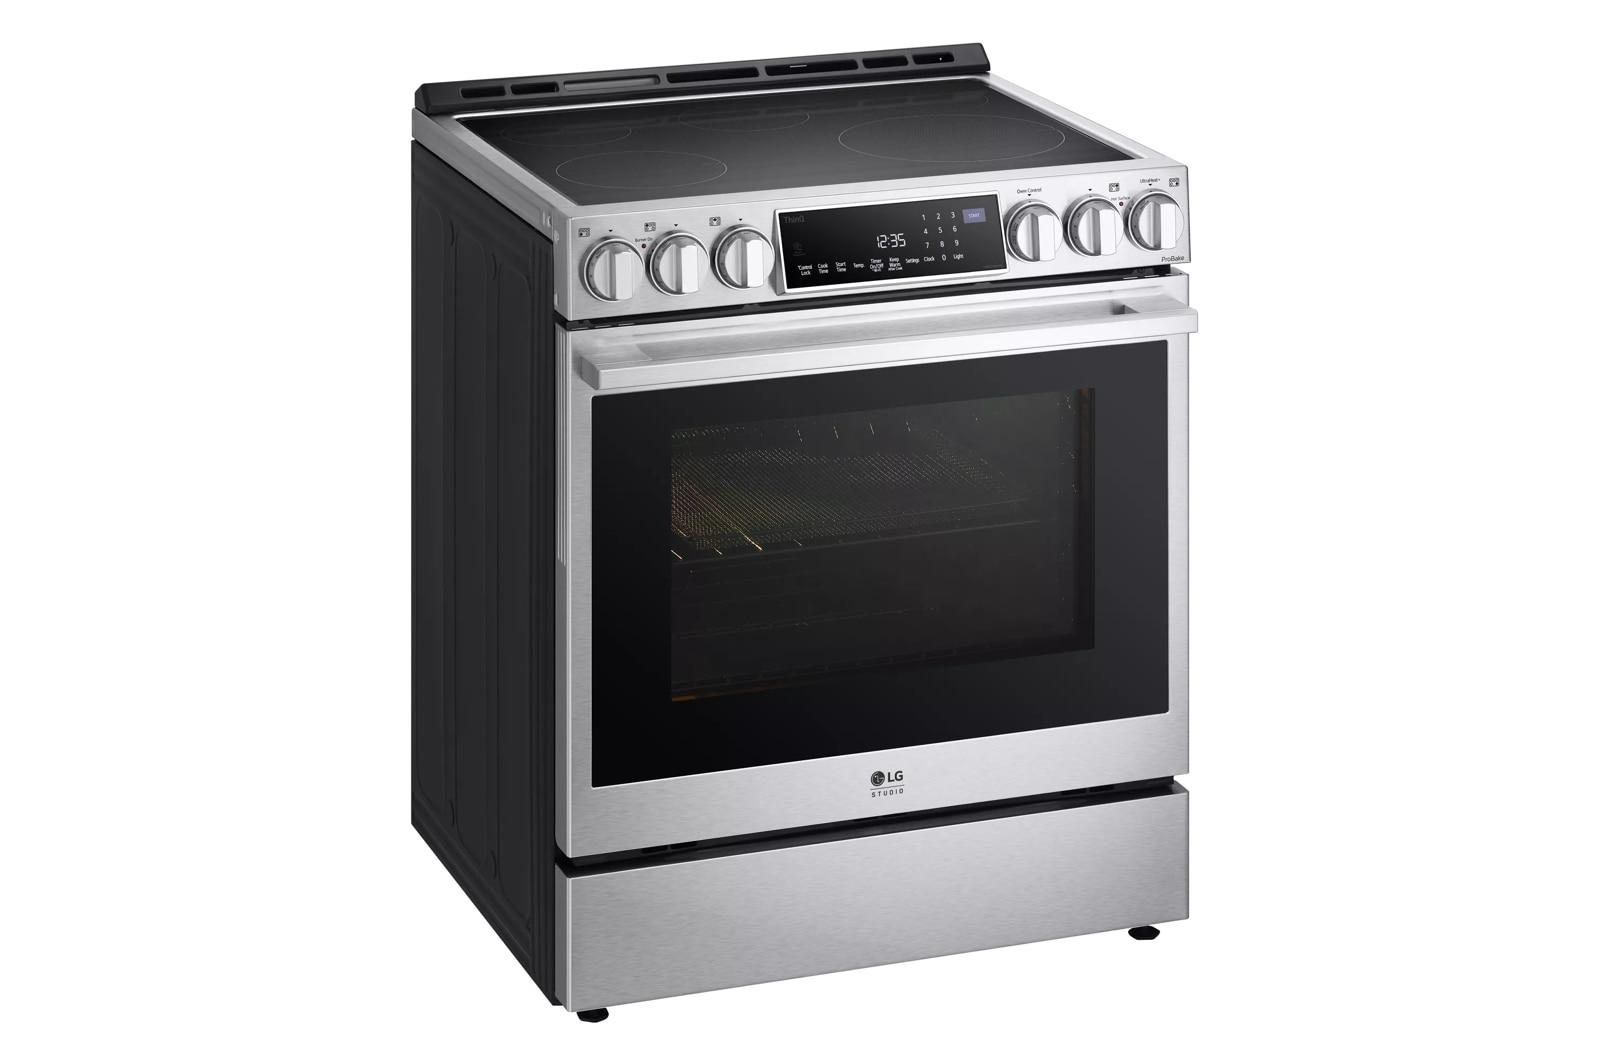 LG STUDIO 6.3 cu. ft. InstaView® Induction Slide-in Range with Air Fry and Air Sous Vide